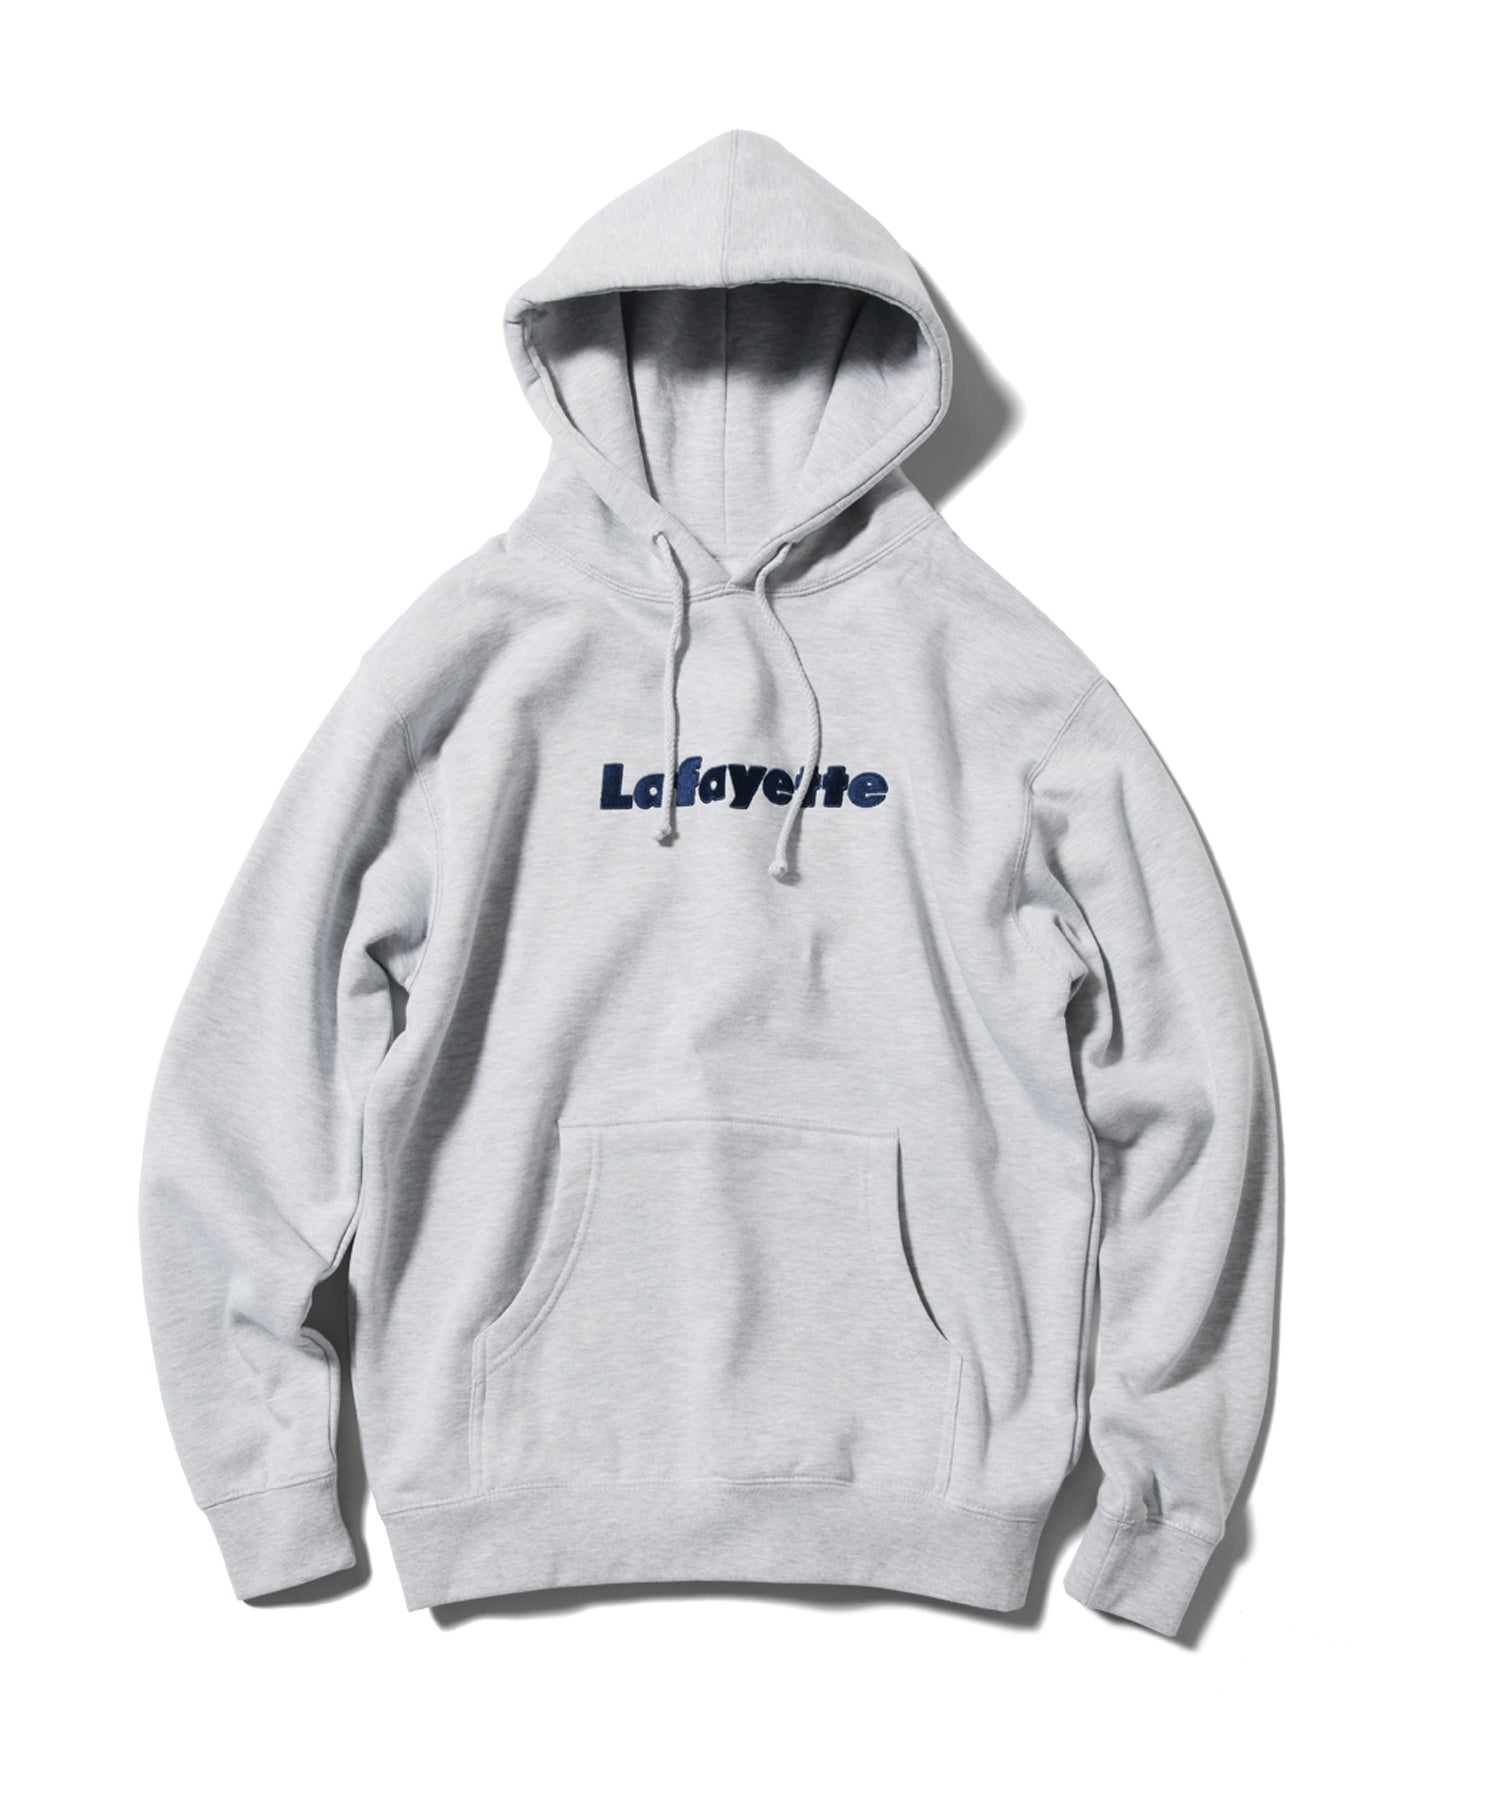 LFYT Lafayette LOGO HOODIE HEATHER GRAY×NAVY LE The Classic